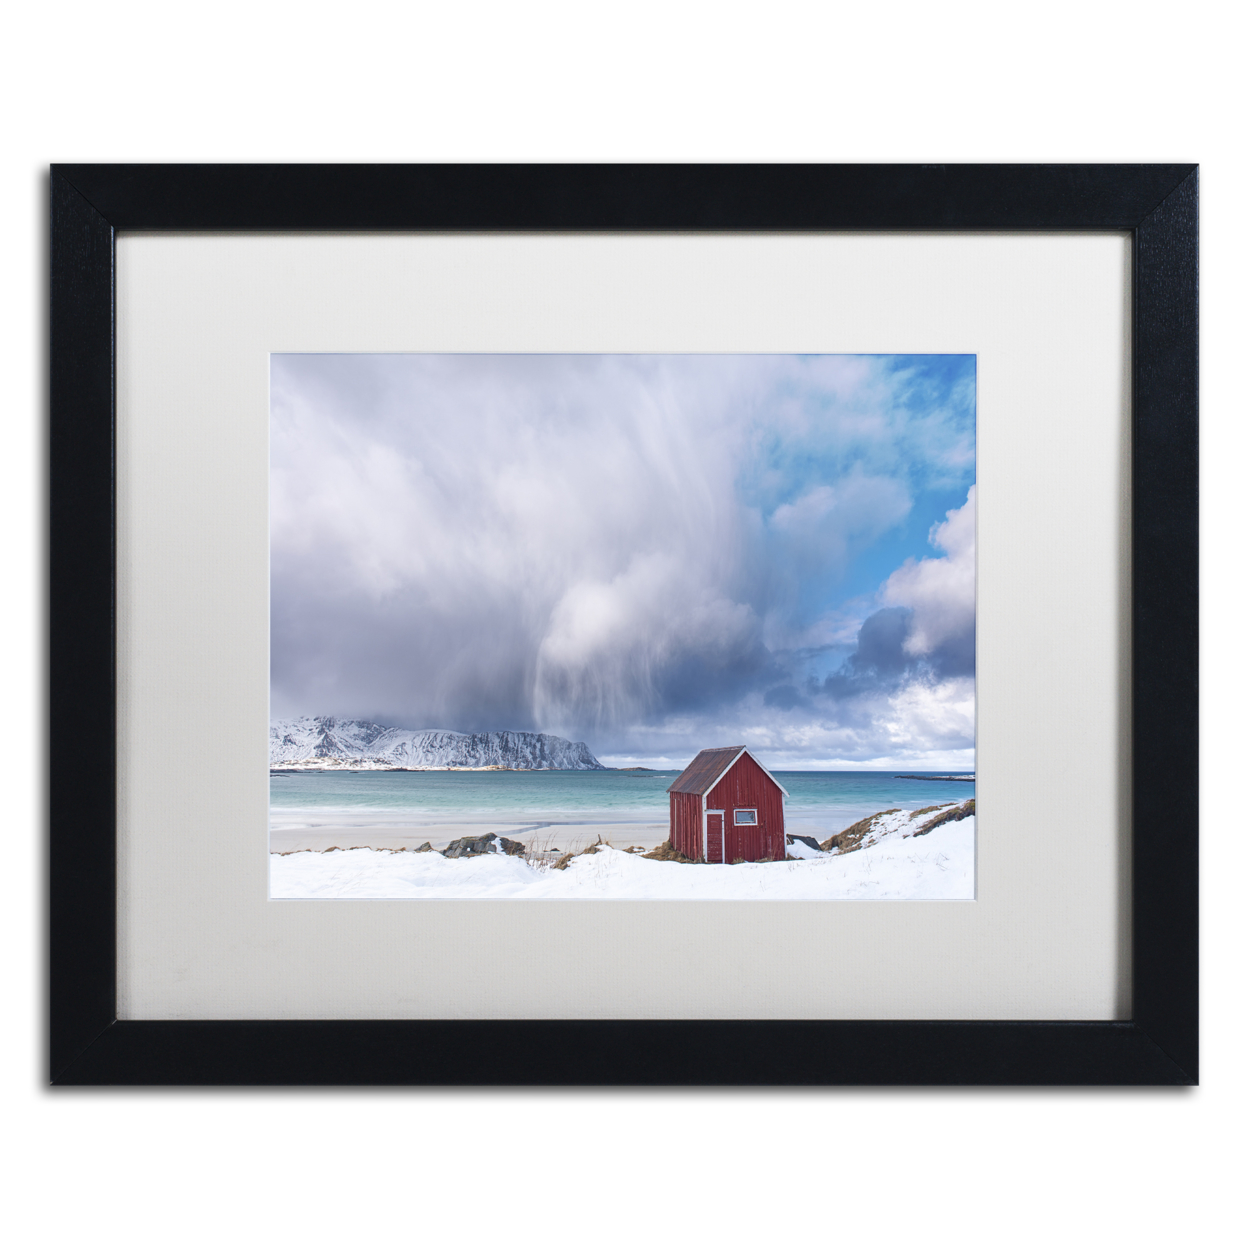 Michael Blanchette Photography 'Beach Mood' Black Wooden Framed Art 18 X 22 Inches